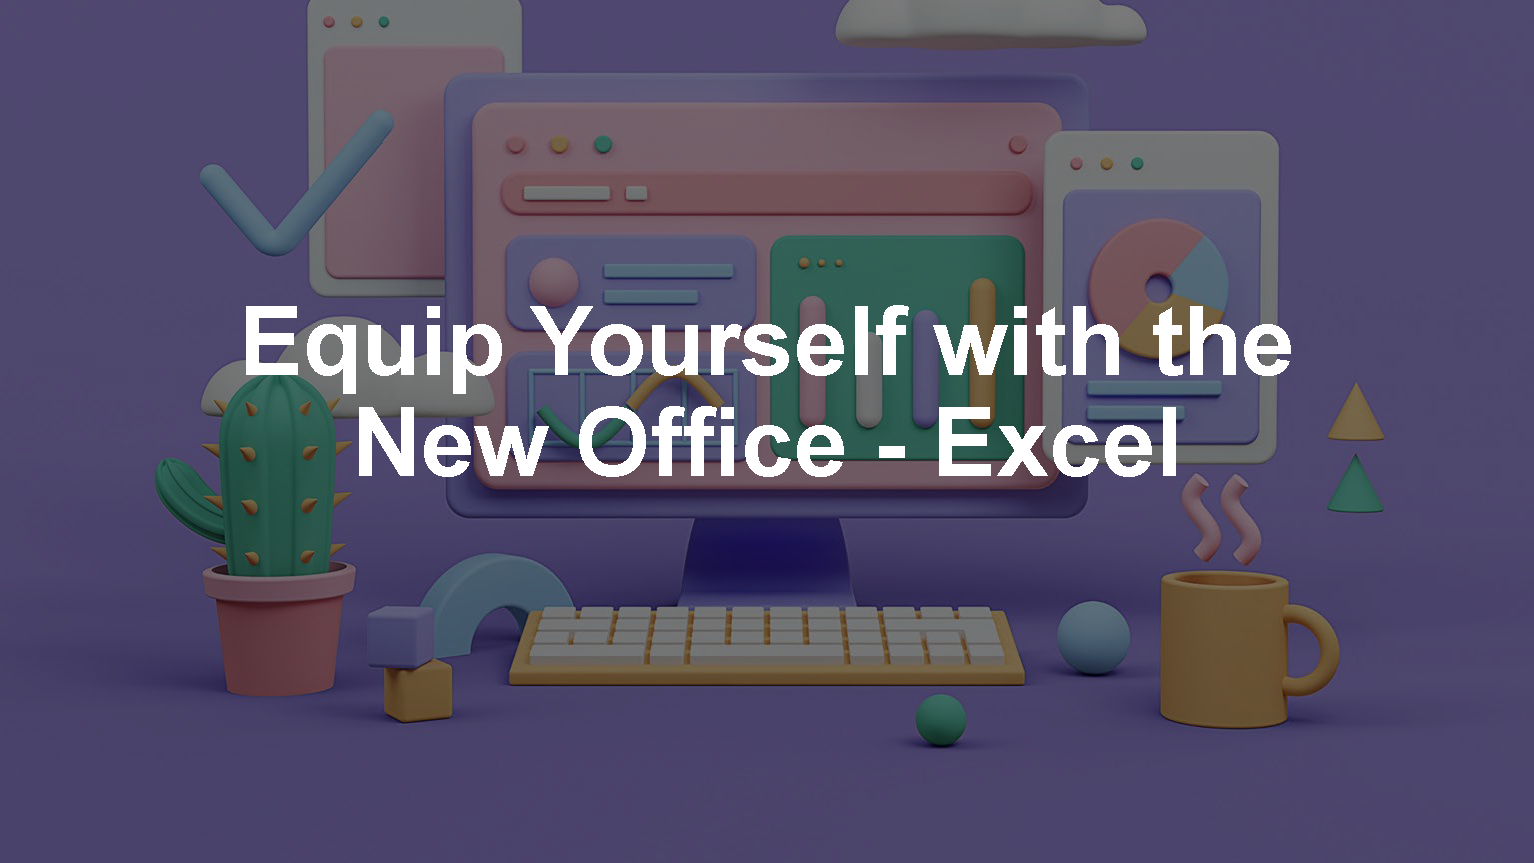 3-Day Microsoft Office Series: Equip yourself with the new Office – Excel